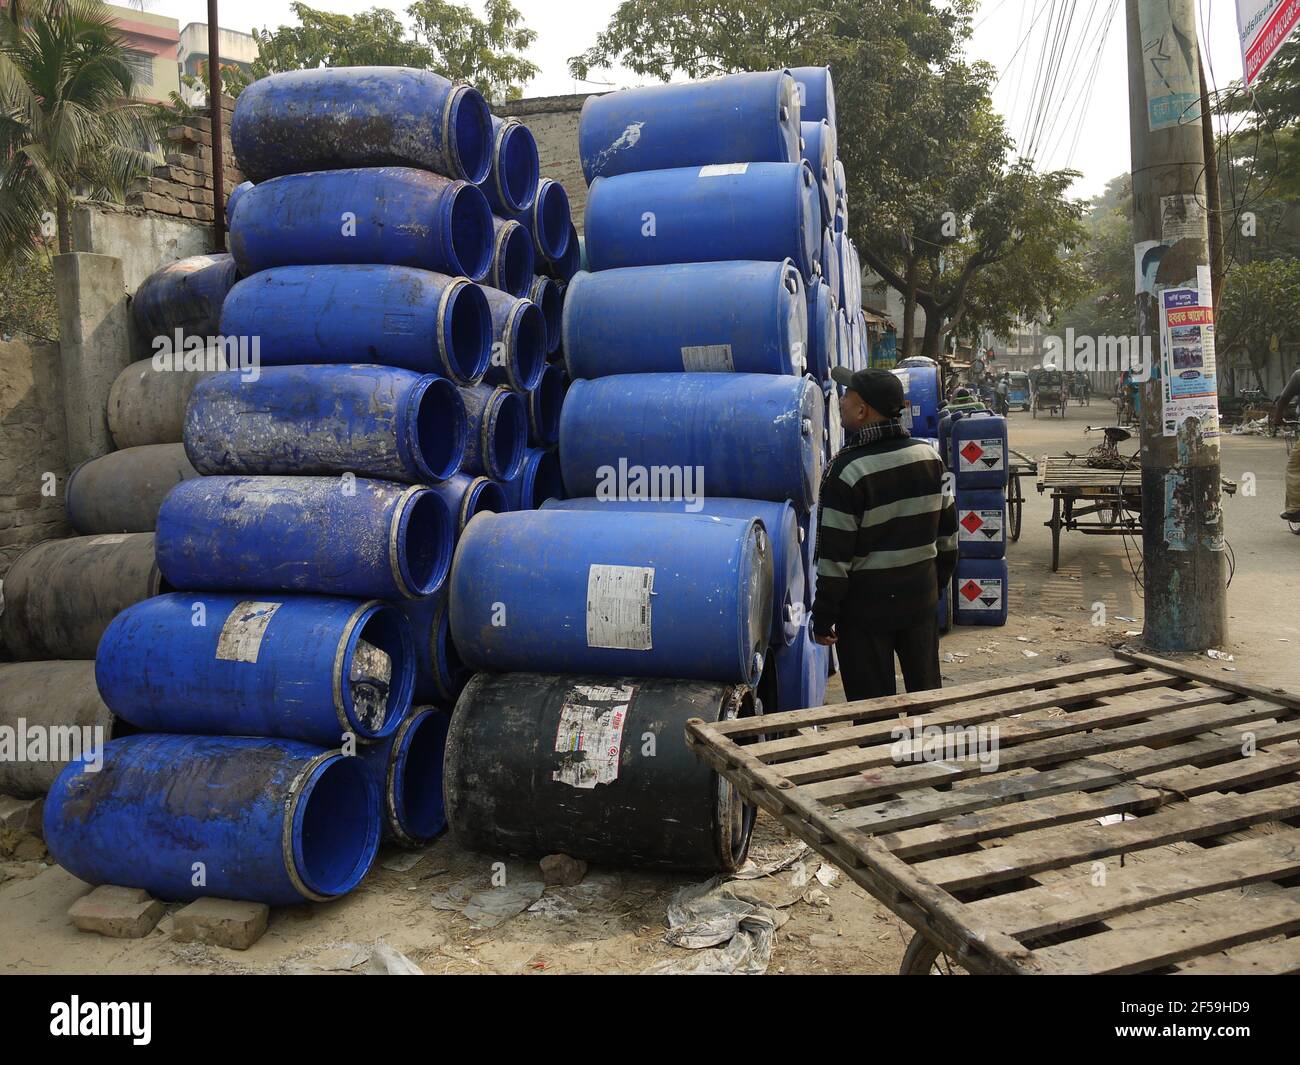 Dangerous chemicals products stored on a street of Hazaribagh, Dhaka, Bangladesh, used to produce leather Stock Photo